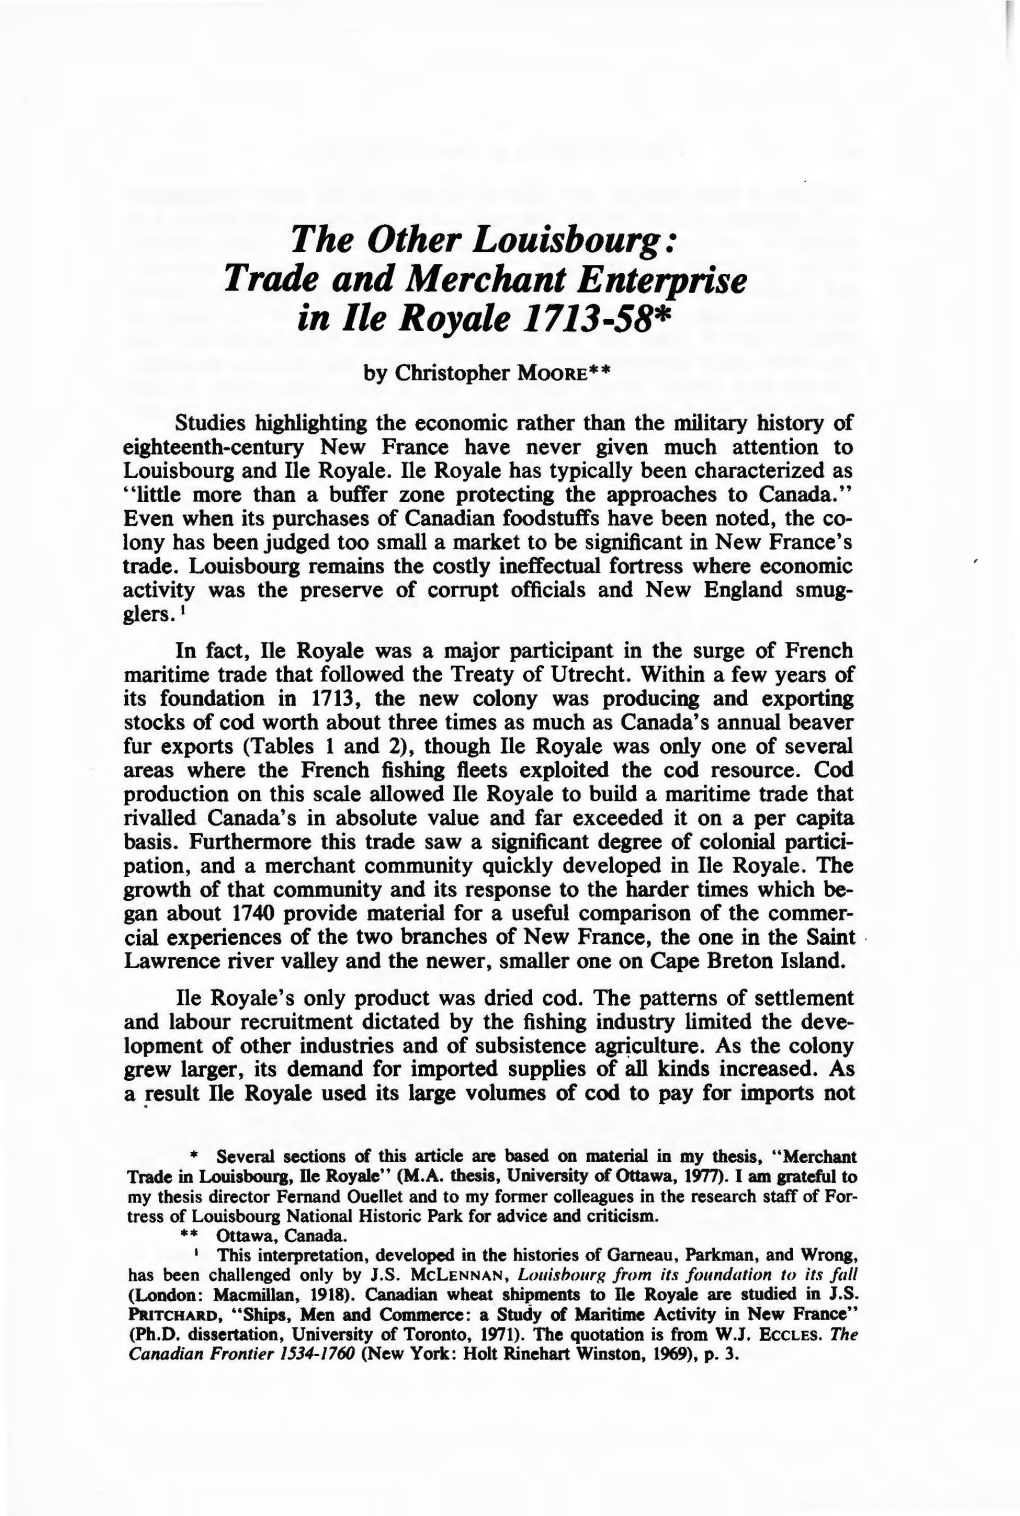 The Other Louisbourg: Trade and Merchant Enterprise in Ile Royale 1713-58*